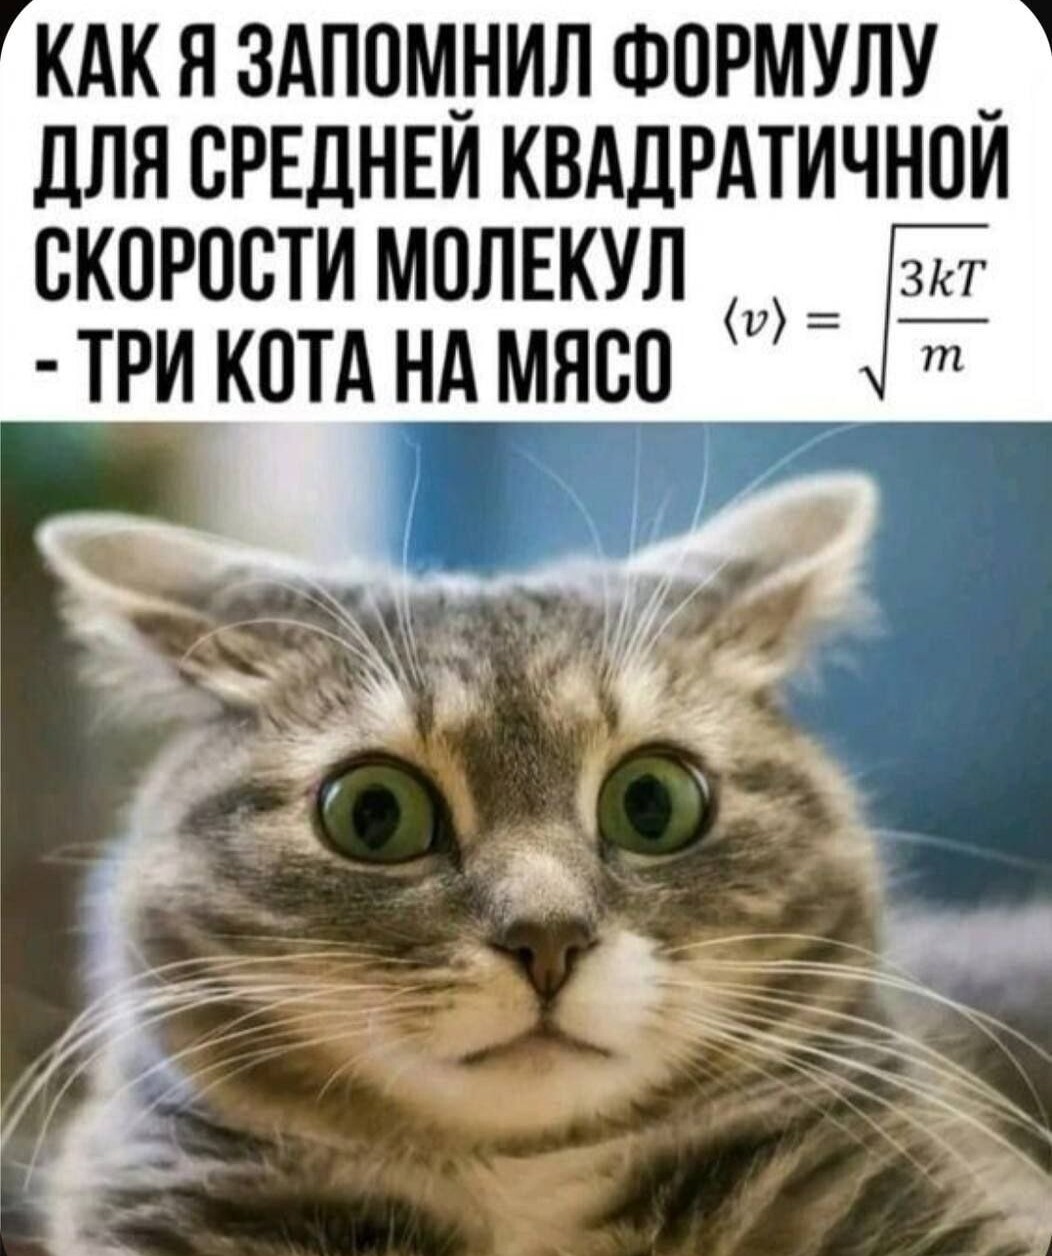 Formula - Humor, Picture with text, The photo, Formula, cat, Repeat